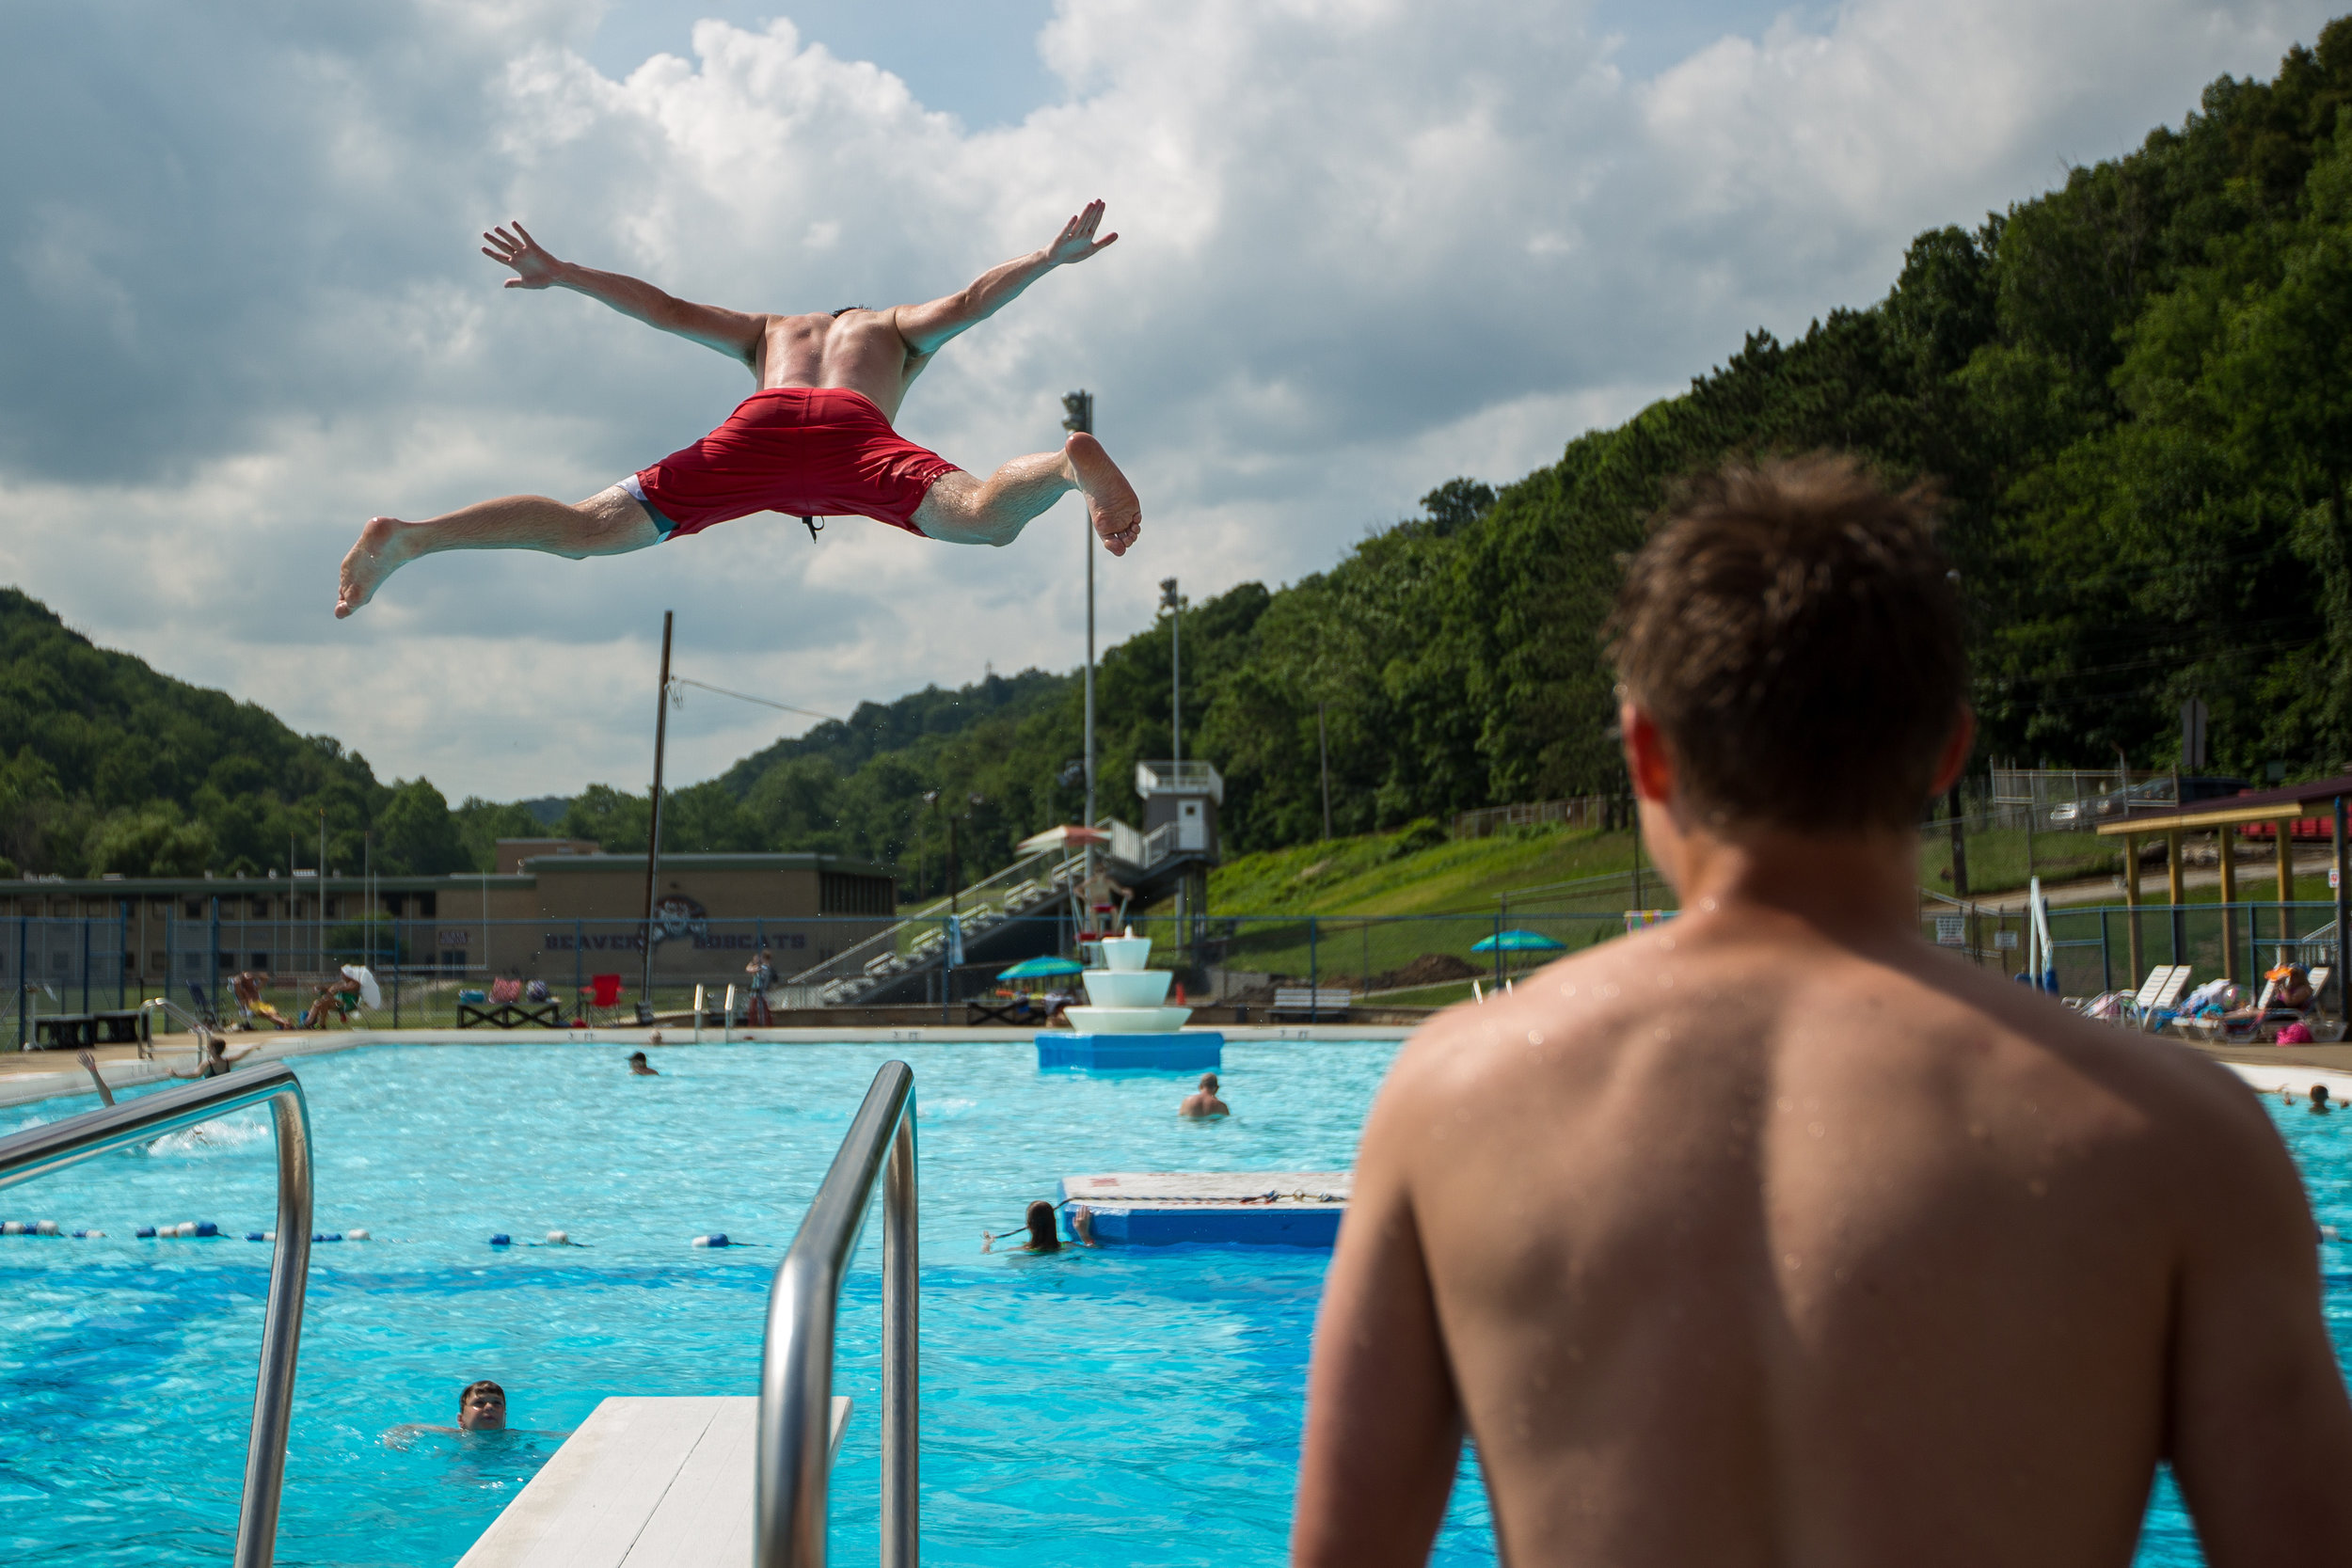  Patrick McGuckin, top left, jumps off of the diving board at the Beaver Pool white friend Zach Logan watches on Thursday afternoon.  